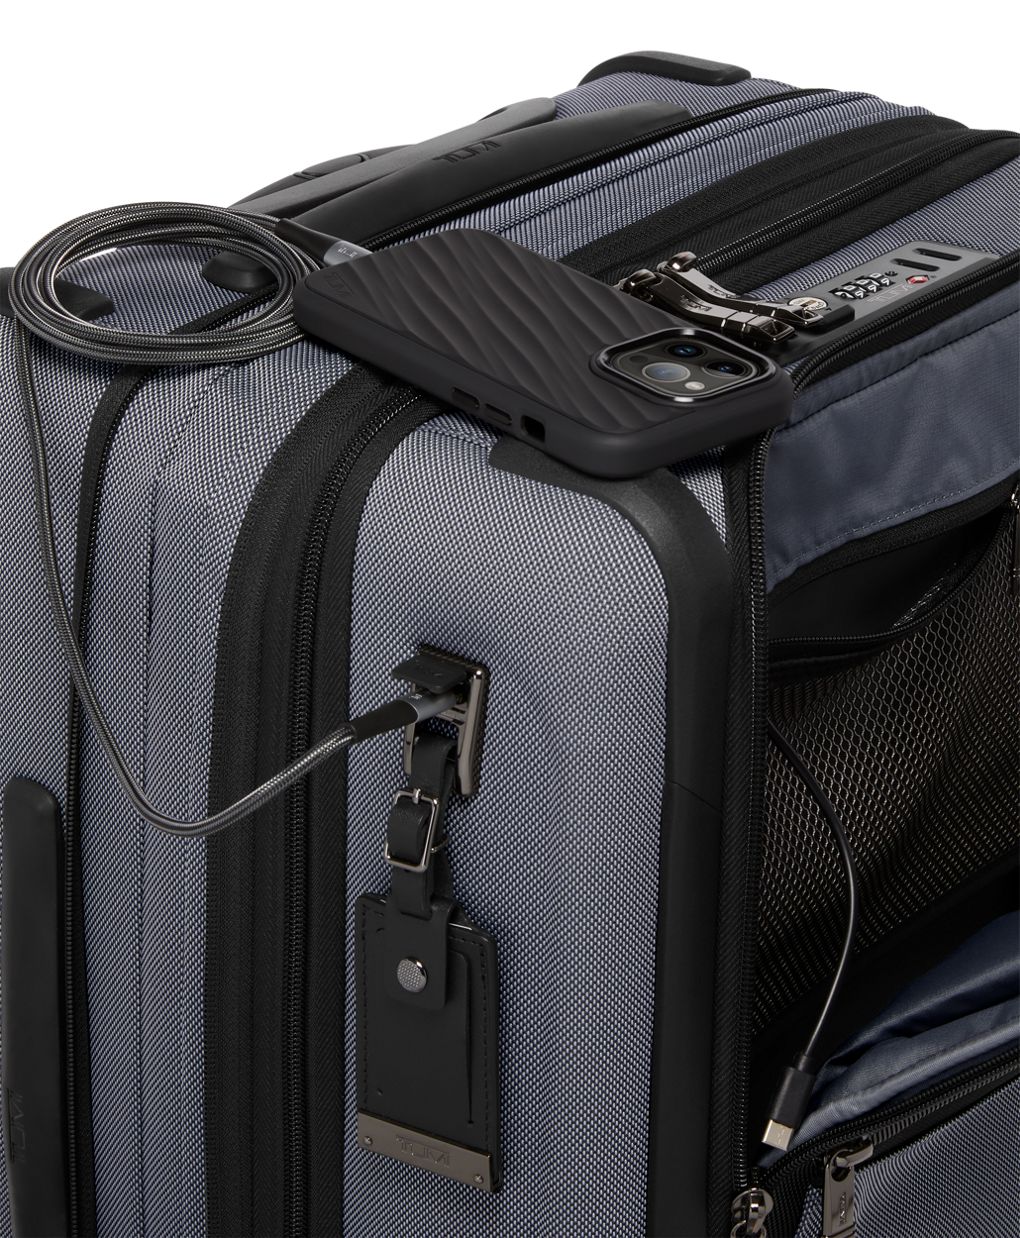 Continental Dual Access 4 Wheeled Carry-On | Tumi US